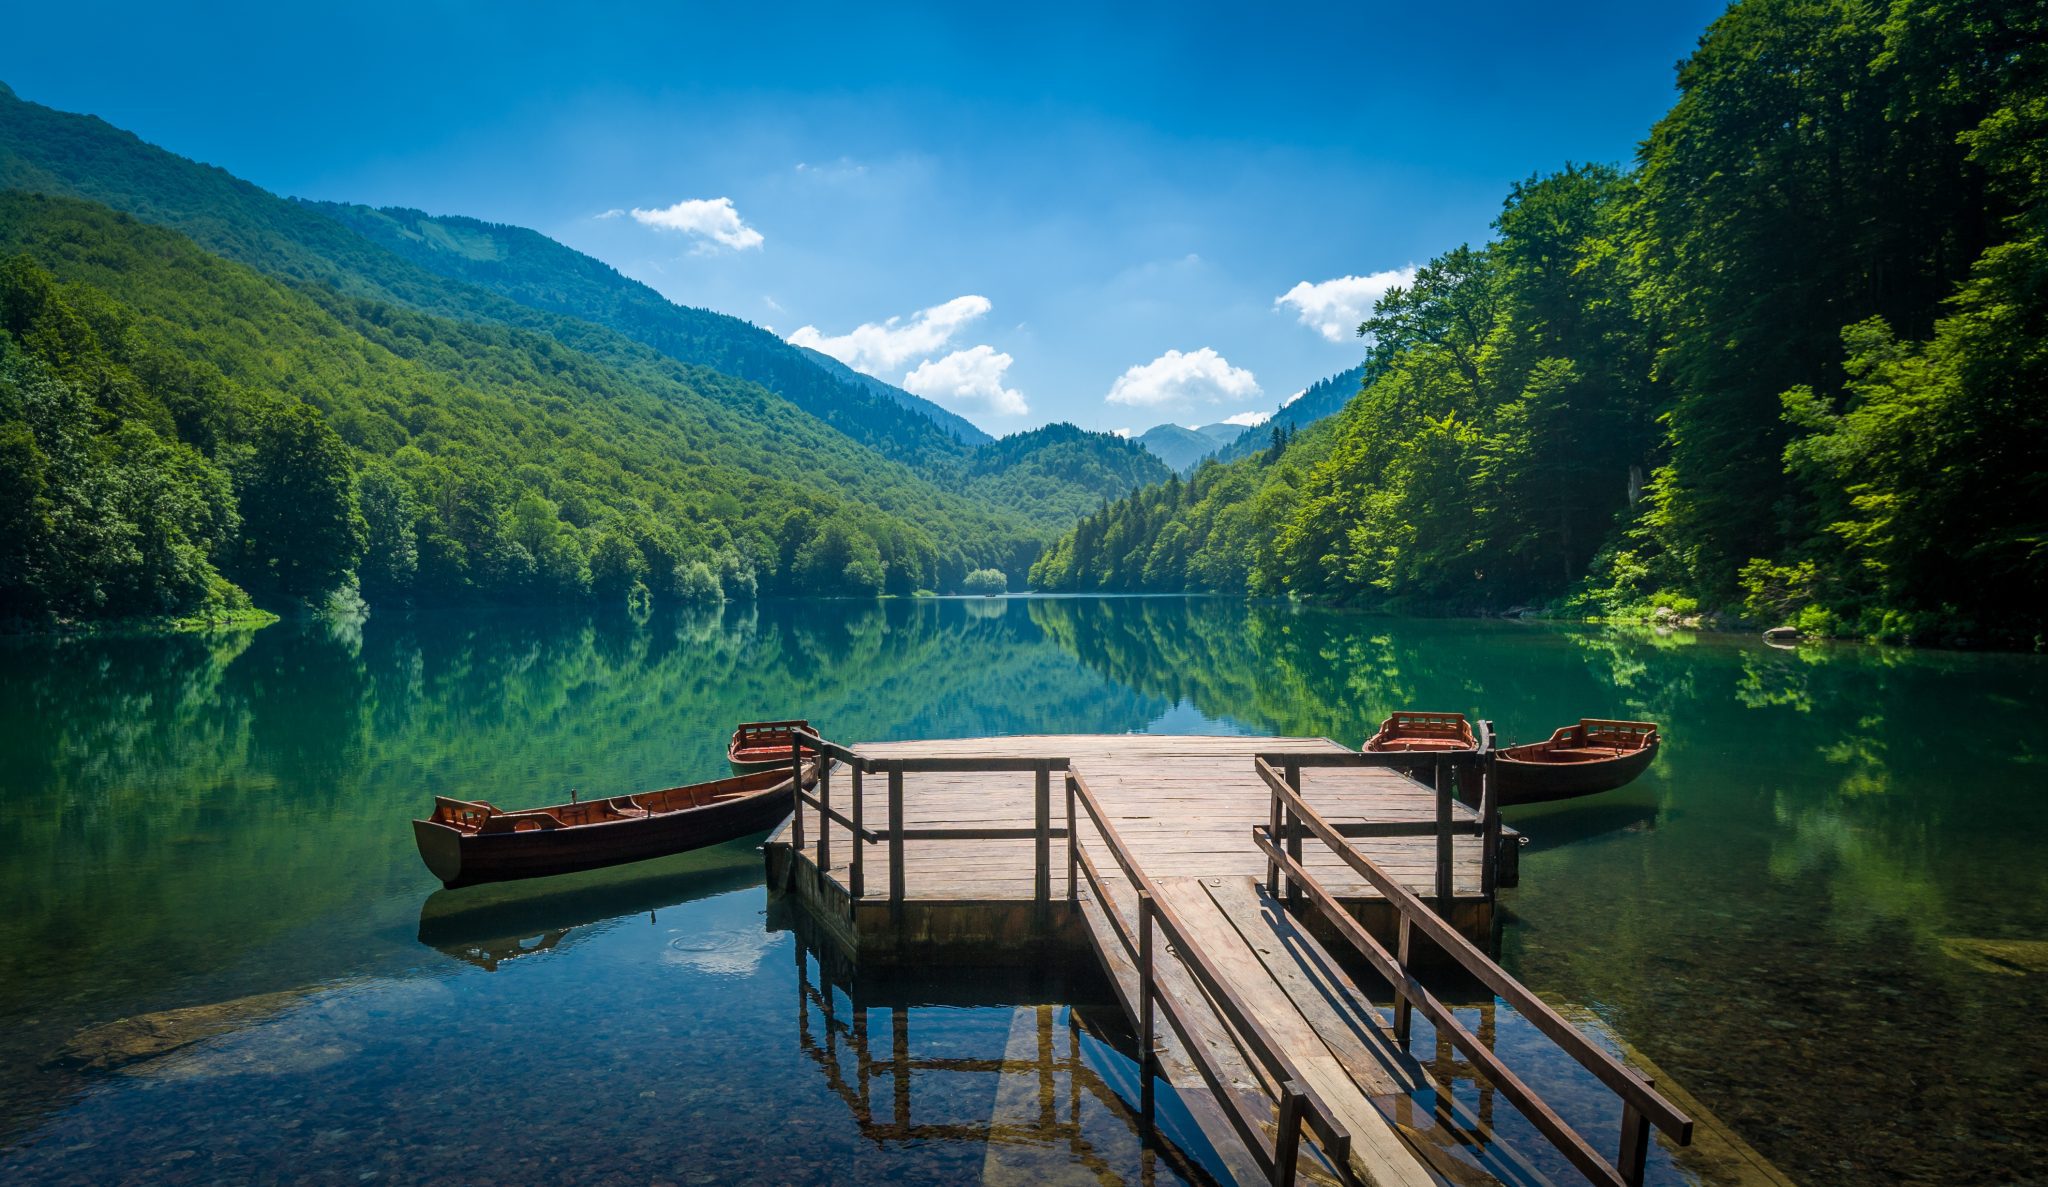 A wooden dock on a calm teal lake surrounded by mountains and forest.